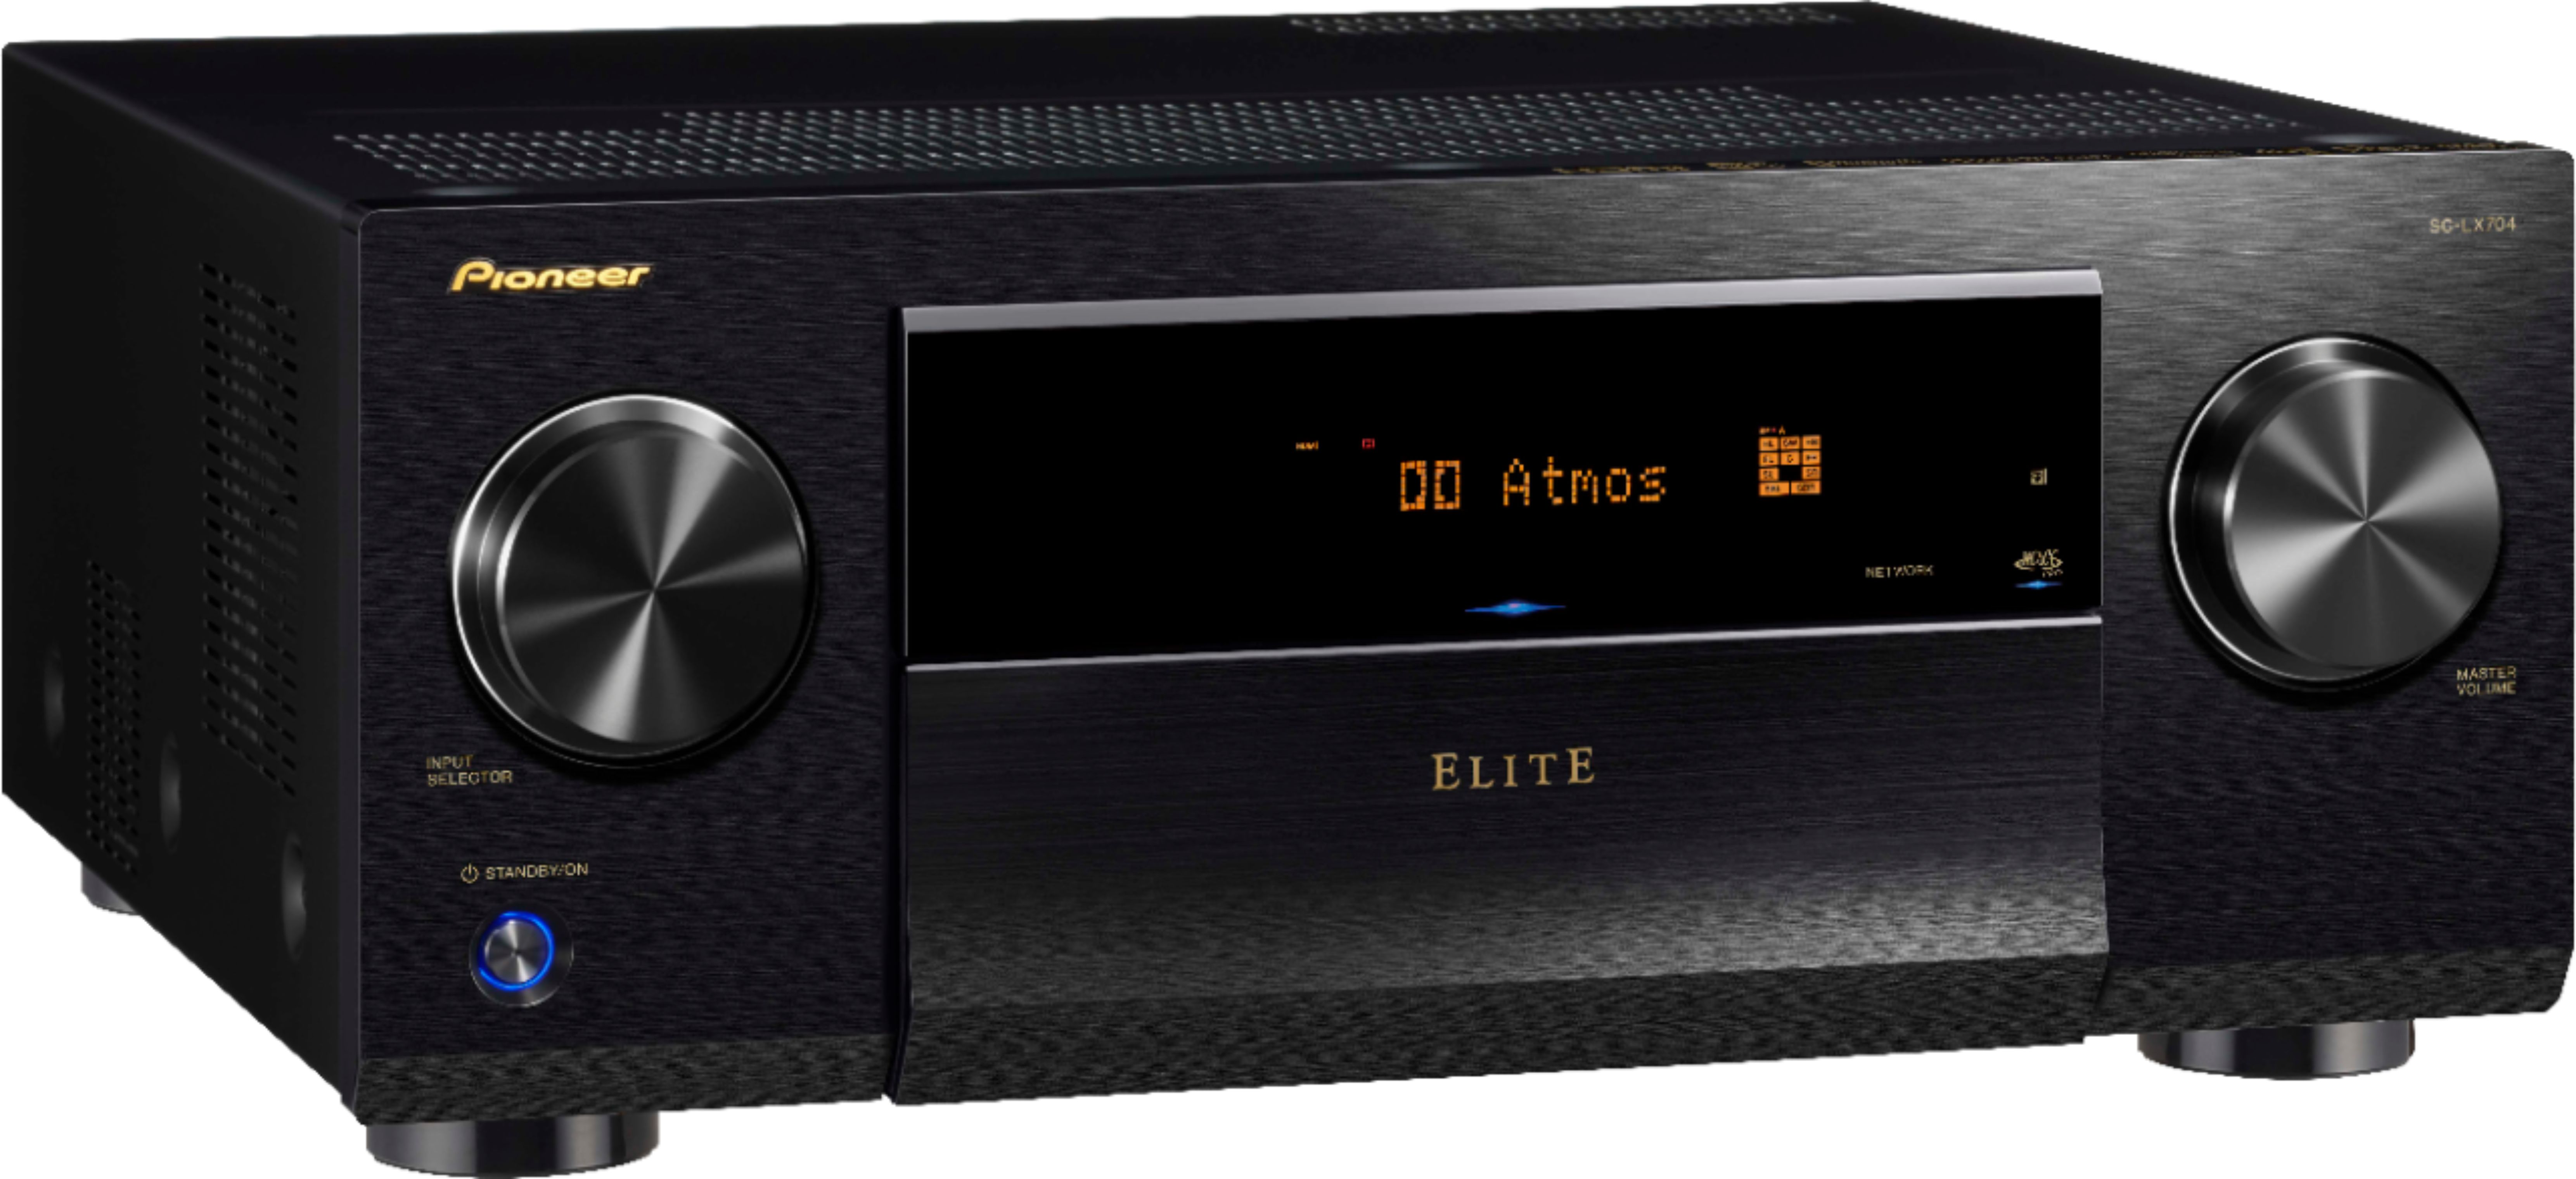 Angle View: Pioneer - Elite 760W 9.2-Ch. Bluetooth Capable with Dolby Atmos 4K Ultra HD HDR Compatible A/V Home Theater Receiver - Black